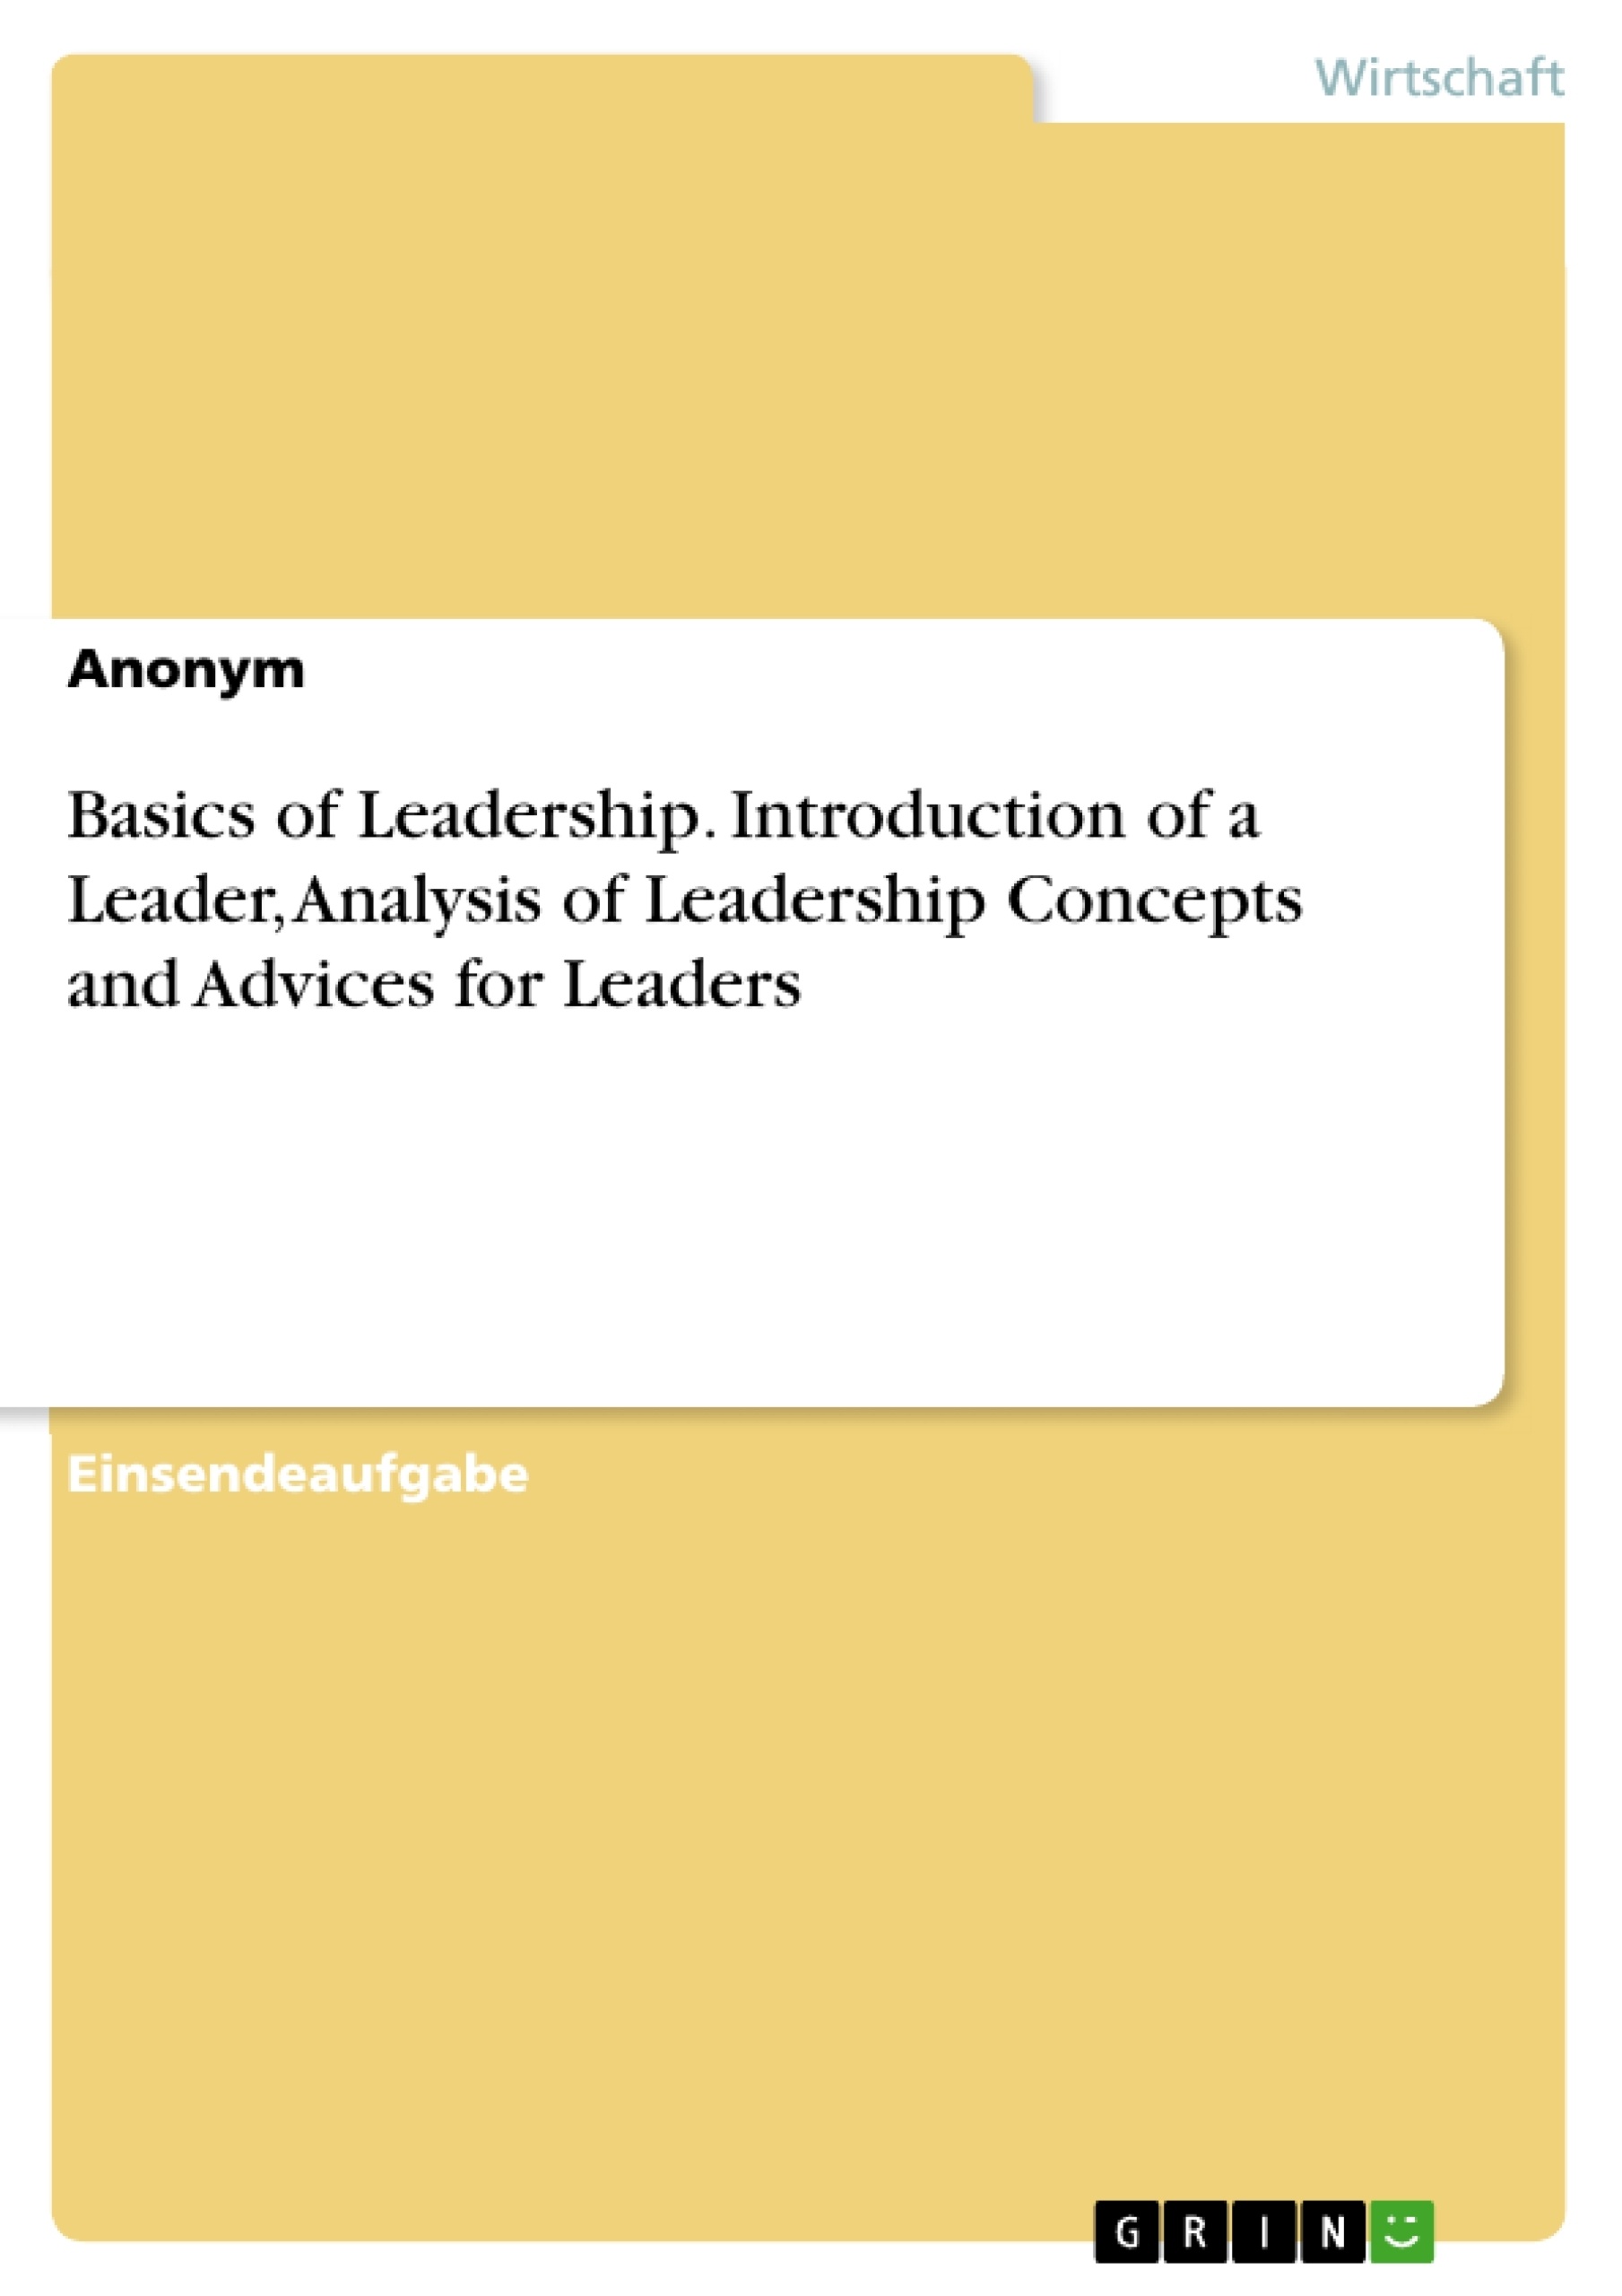 Título: Basics of Leadership. Introduction of a Leader, Analysis of Leadership Concepts and Advices for Leaders